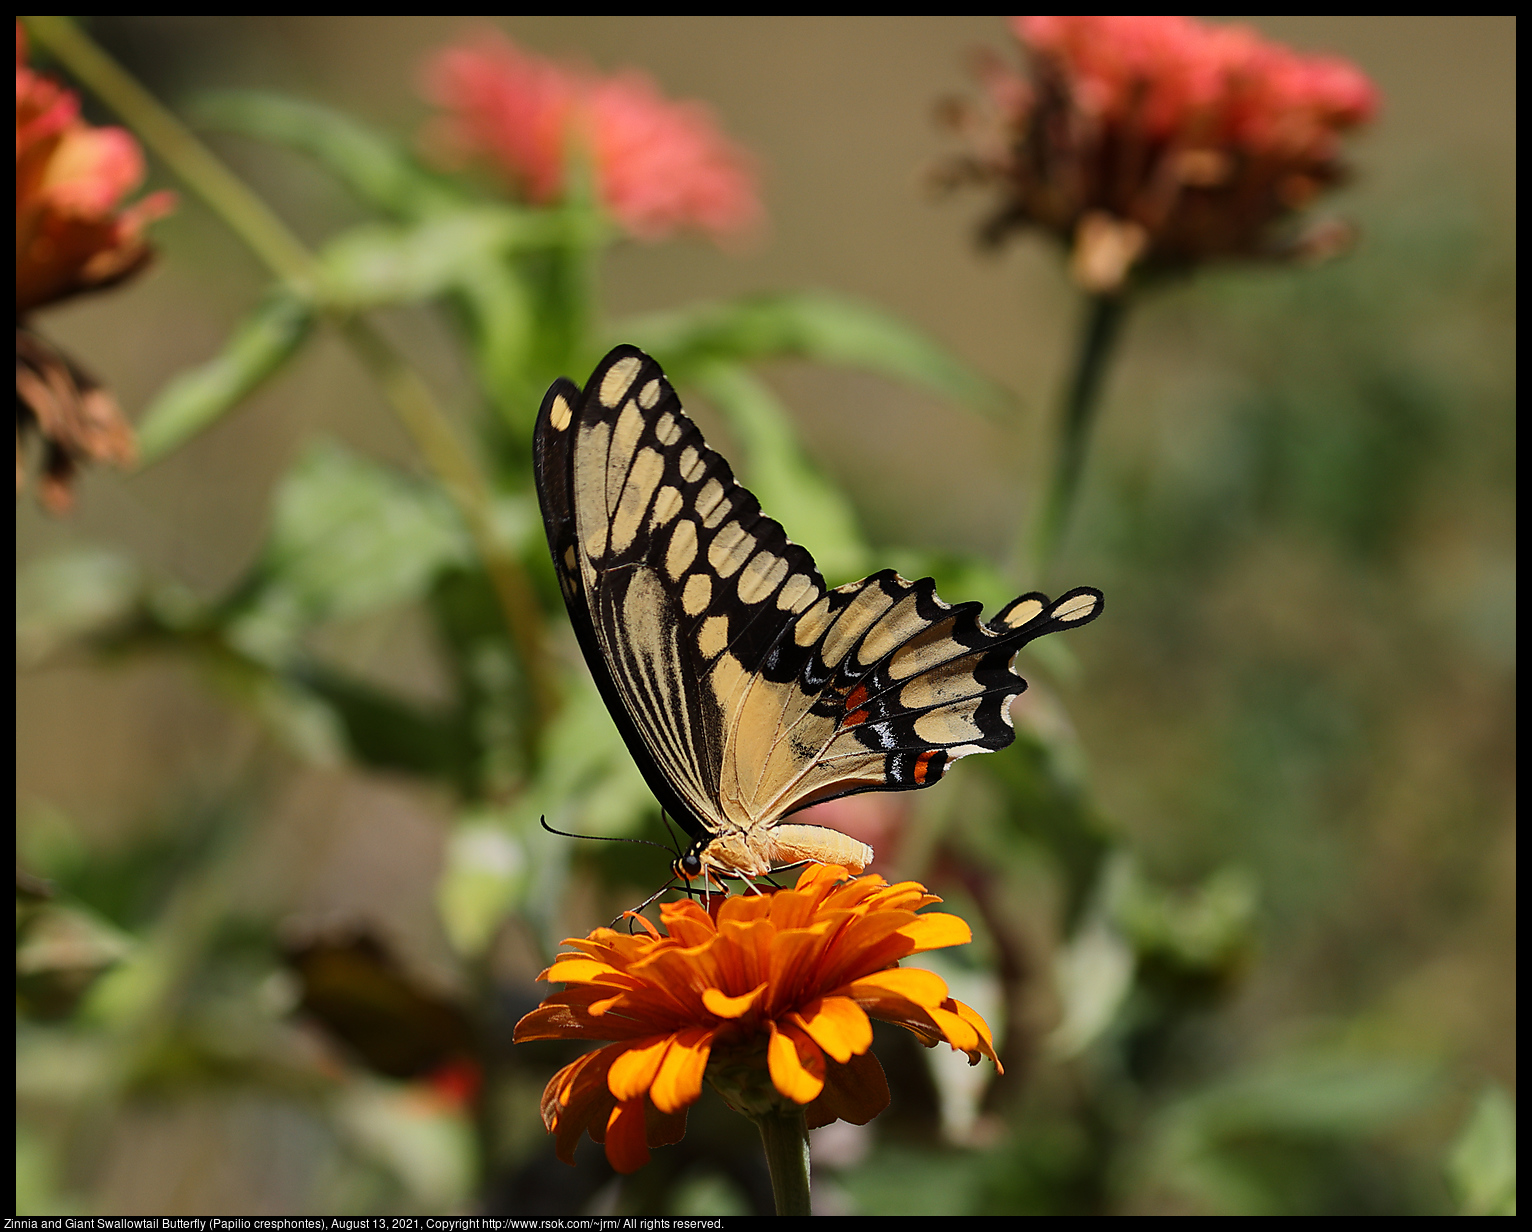 Zinnia and Giant Swallowtail Butterfly (Papilio cresphontes), August 13, 2021